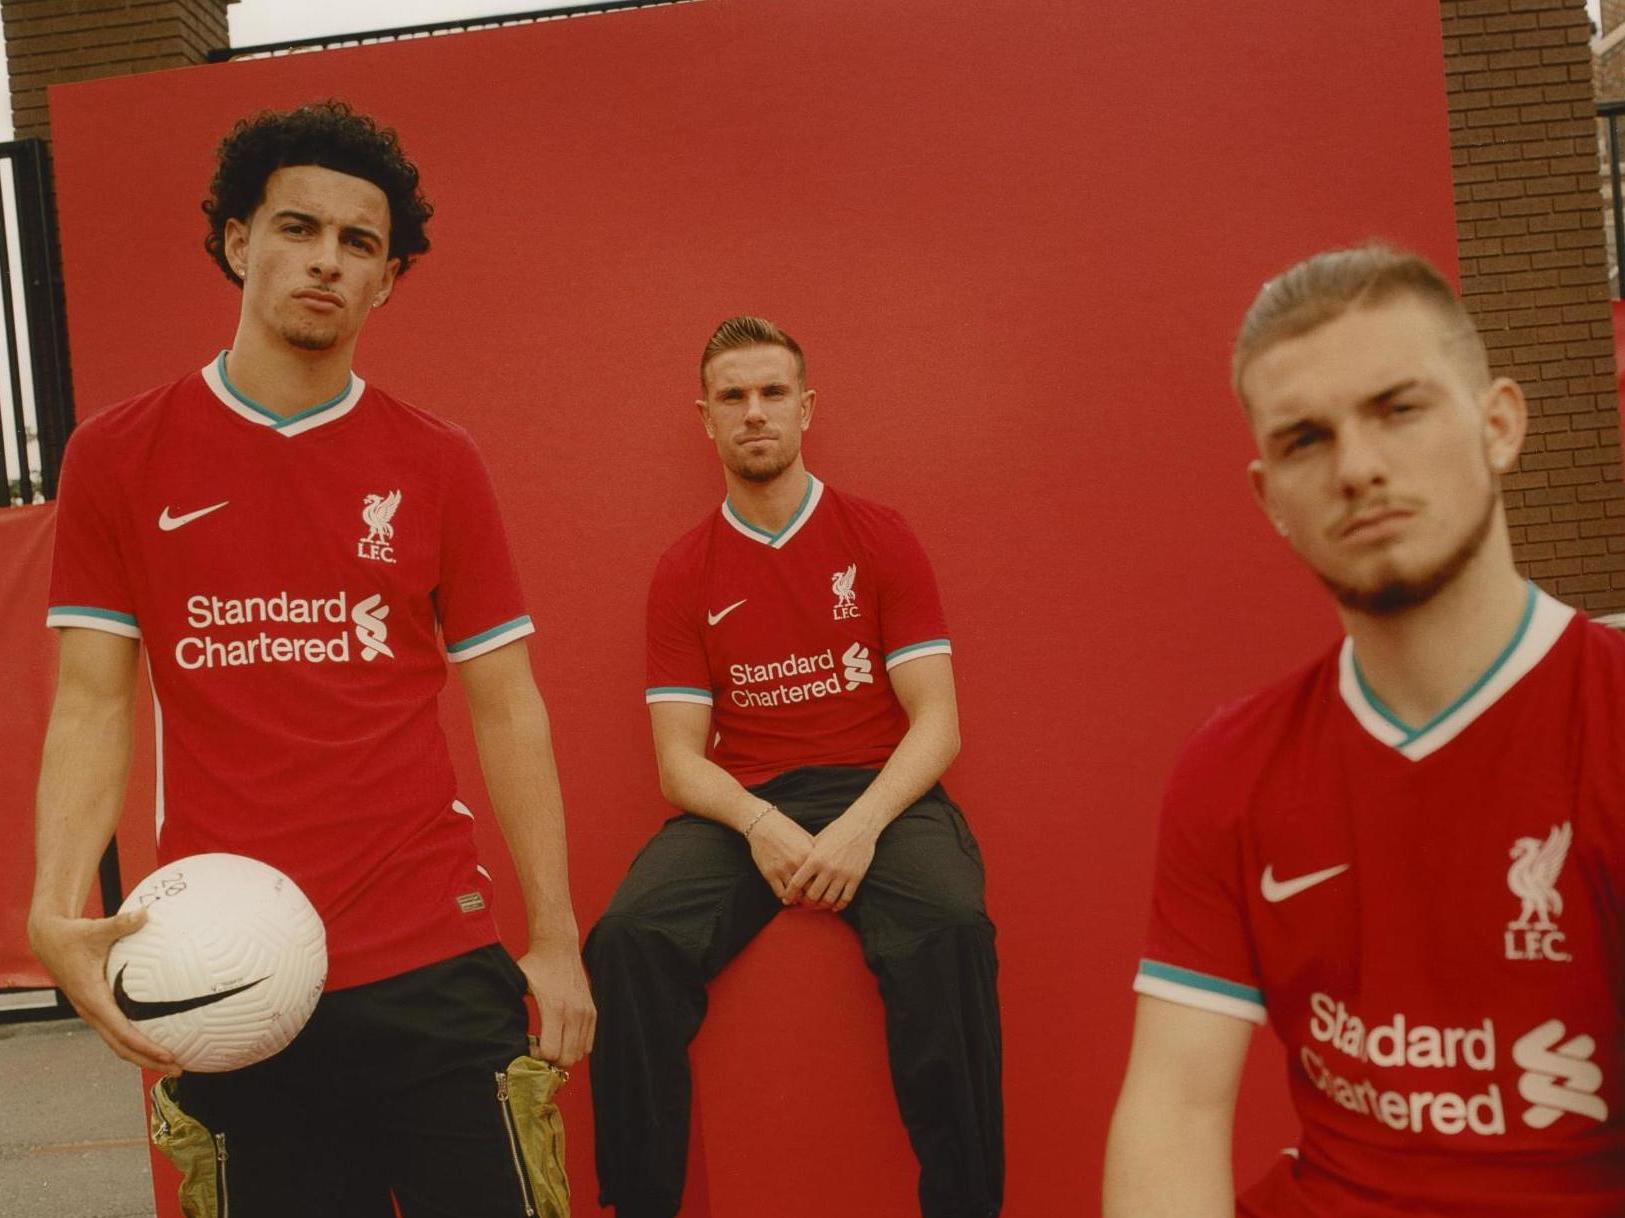 new liverpool nike kit release date